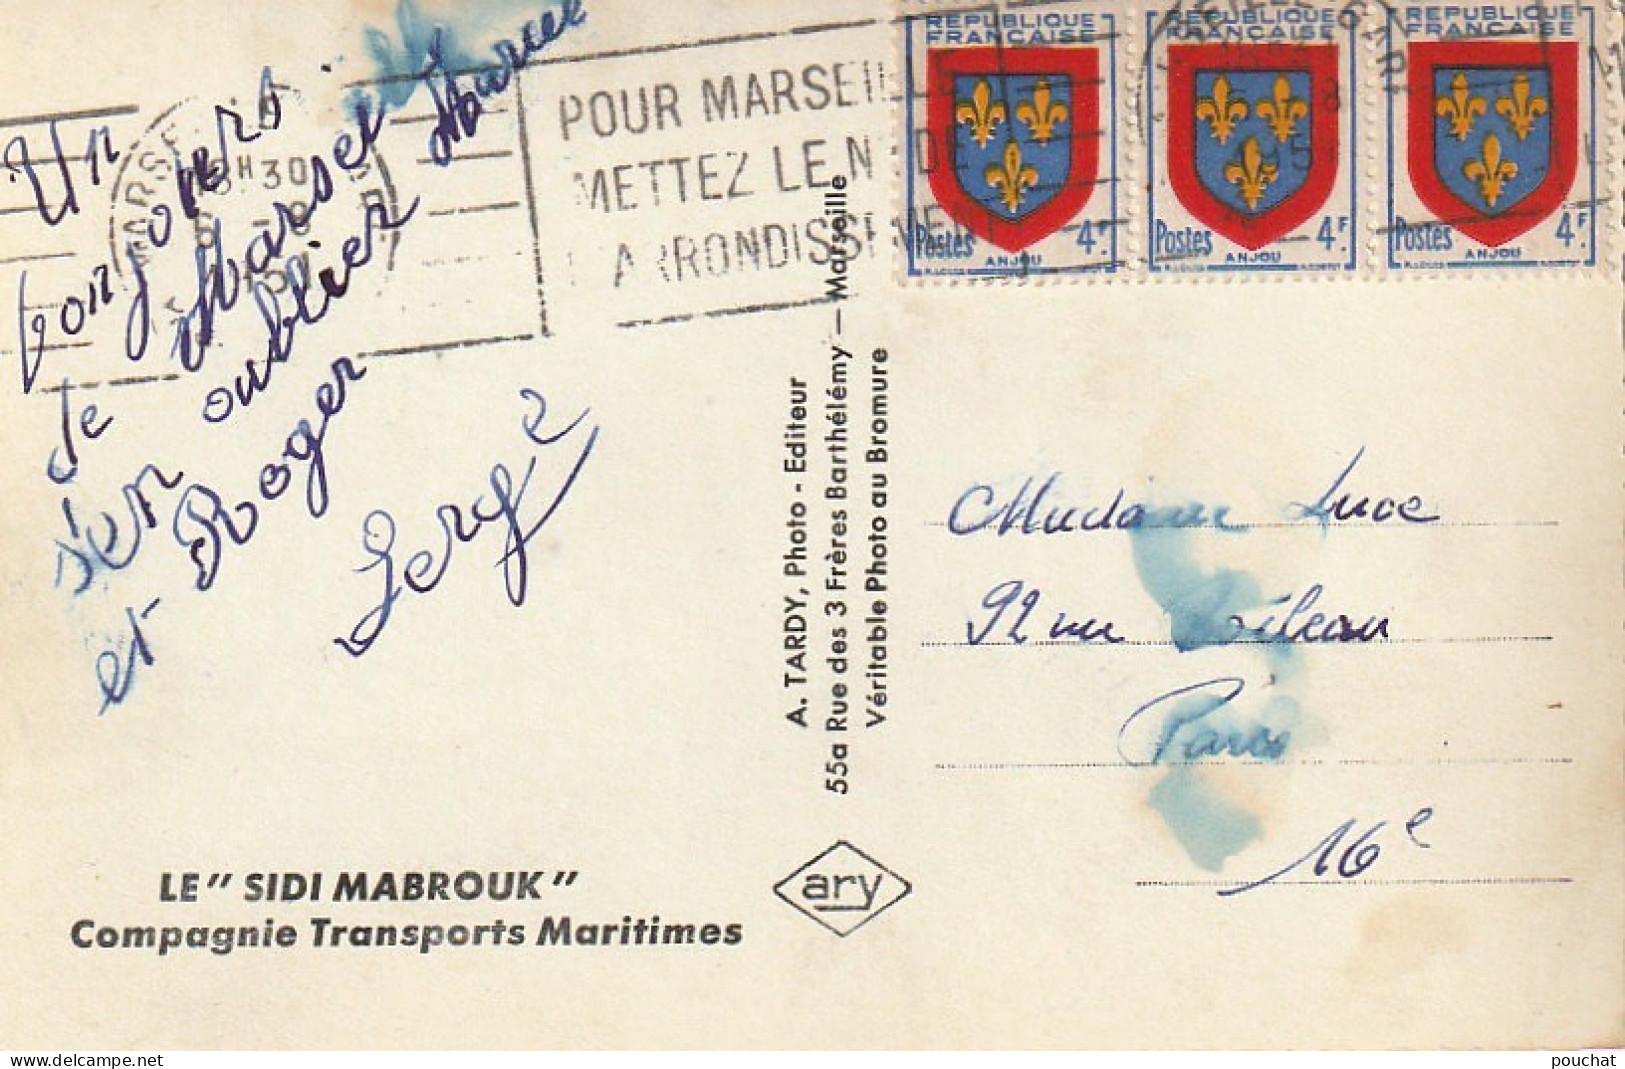 RE 12 - PAQUEBOT " SIDI MABROUK "- COMPAGNIE TRANSPORTS MARITIMES - 2 SCANS - Dampfer